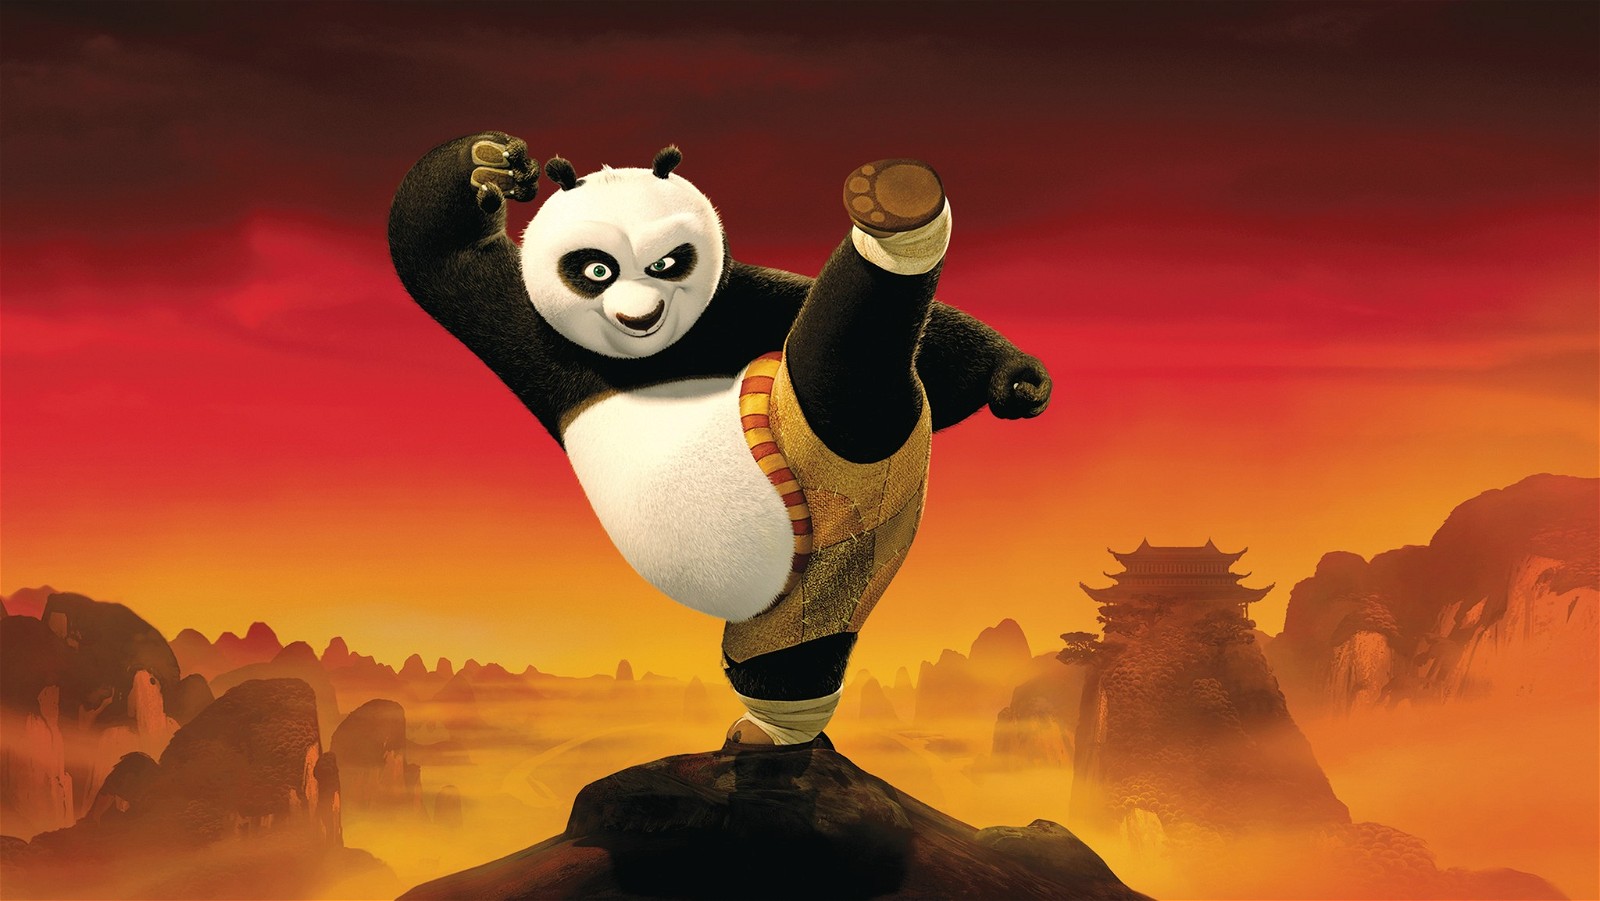 Kung Fu Panda 5 should have the quality of the previous films in the franchise